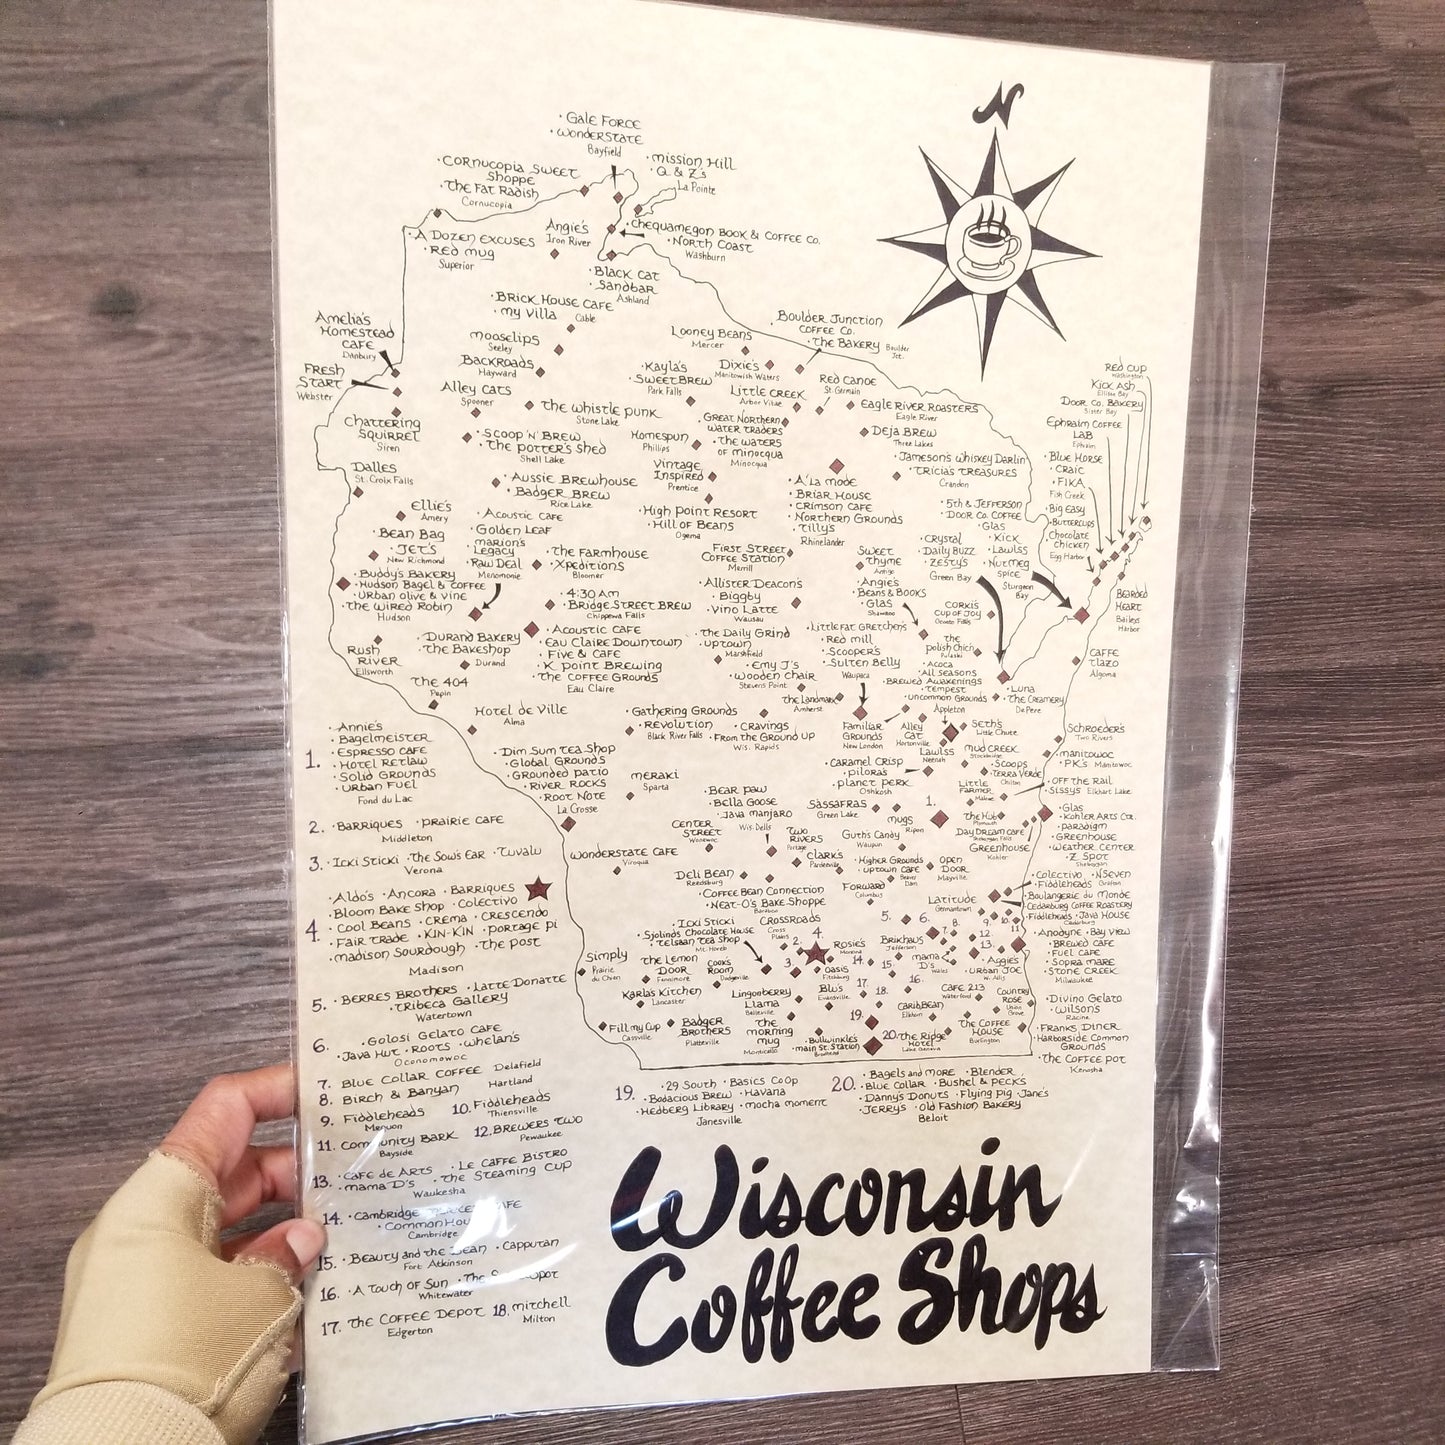 Wisconsin Coffee Shops Hand Drawn Map